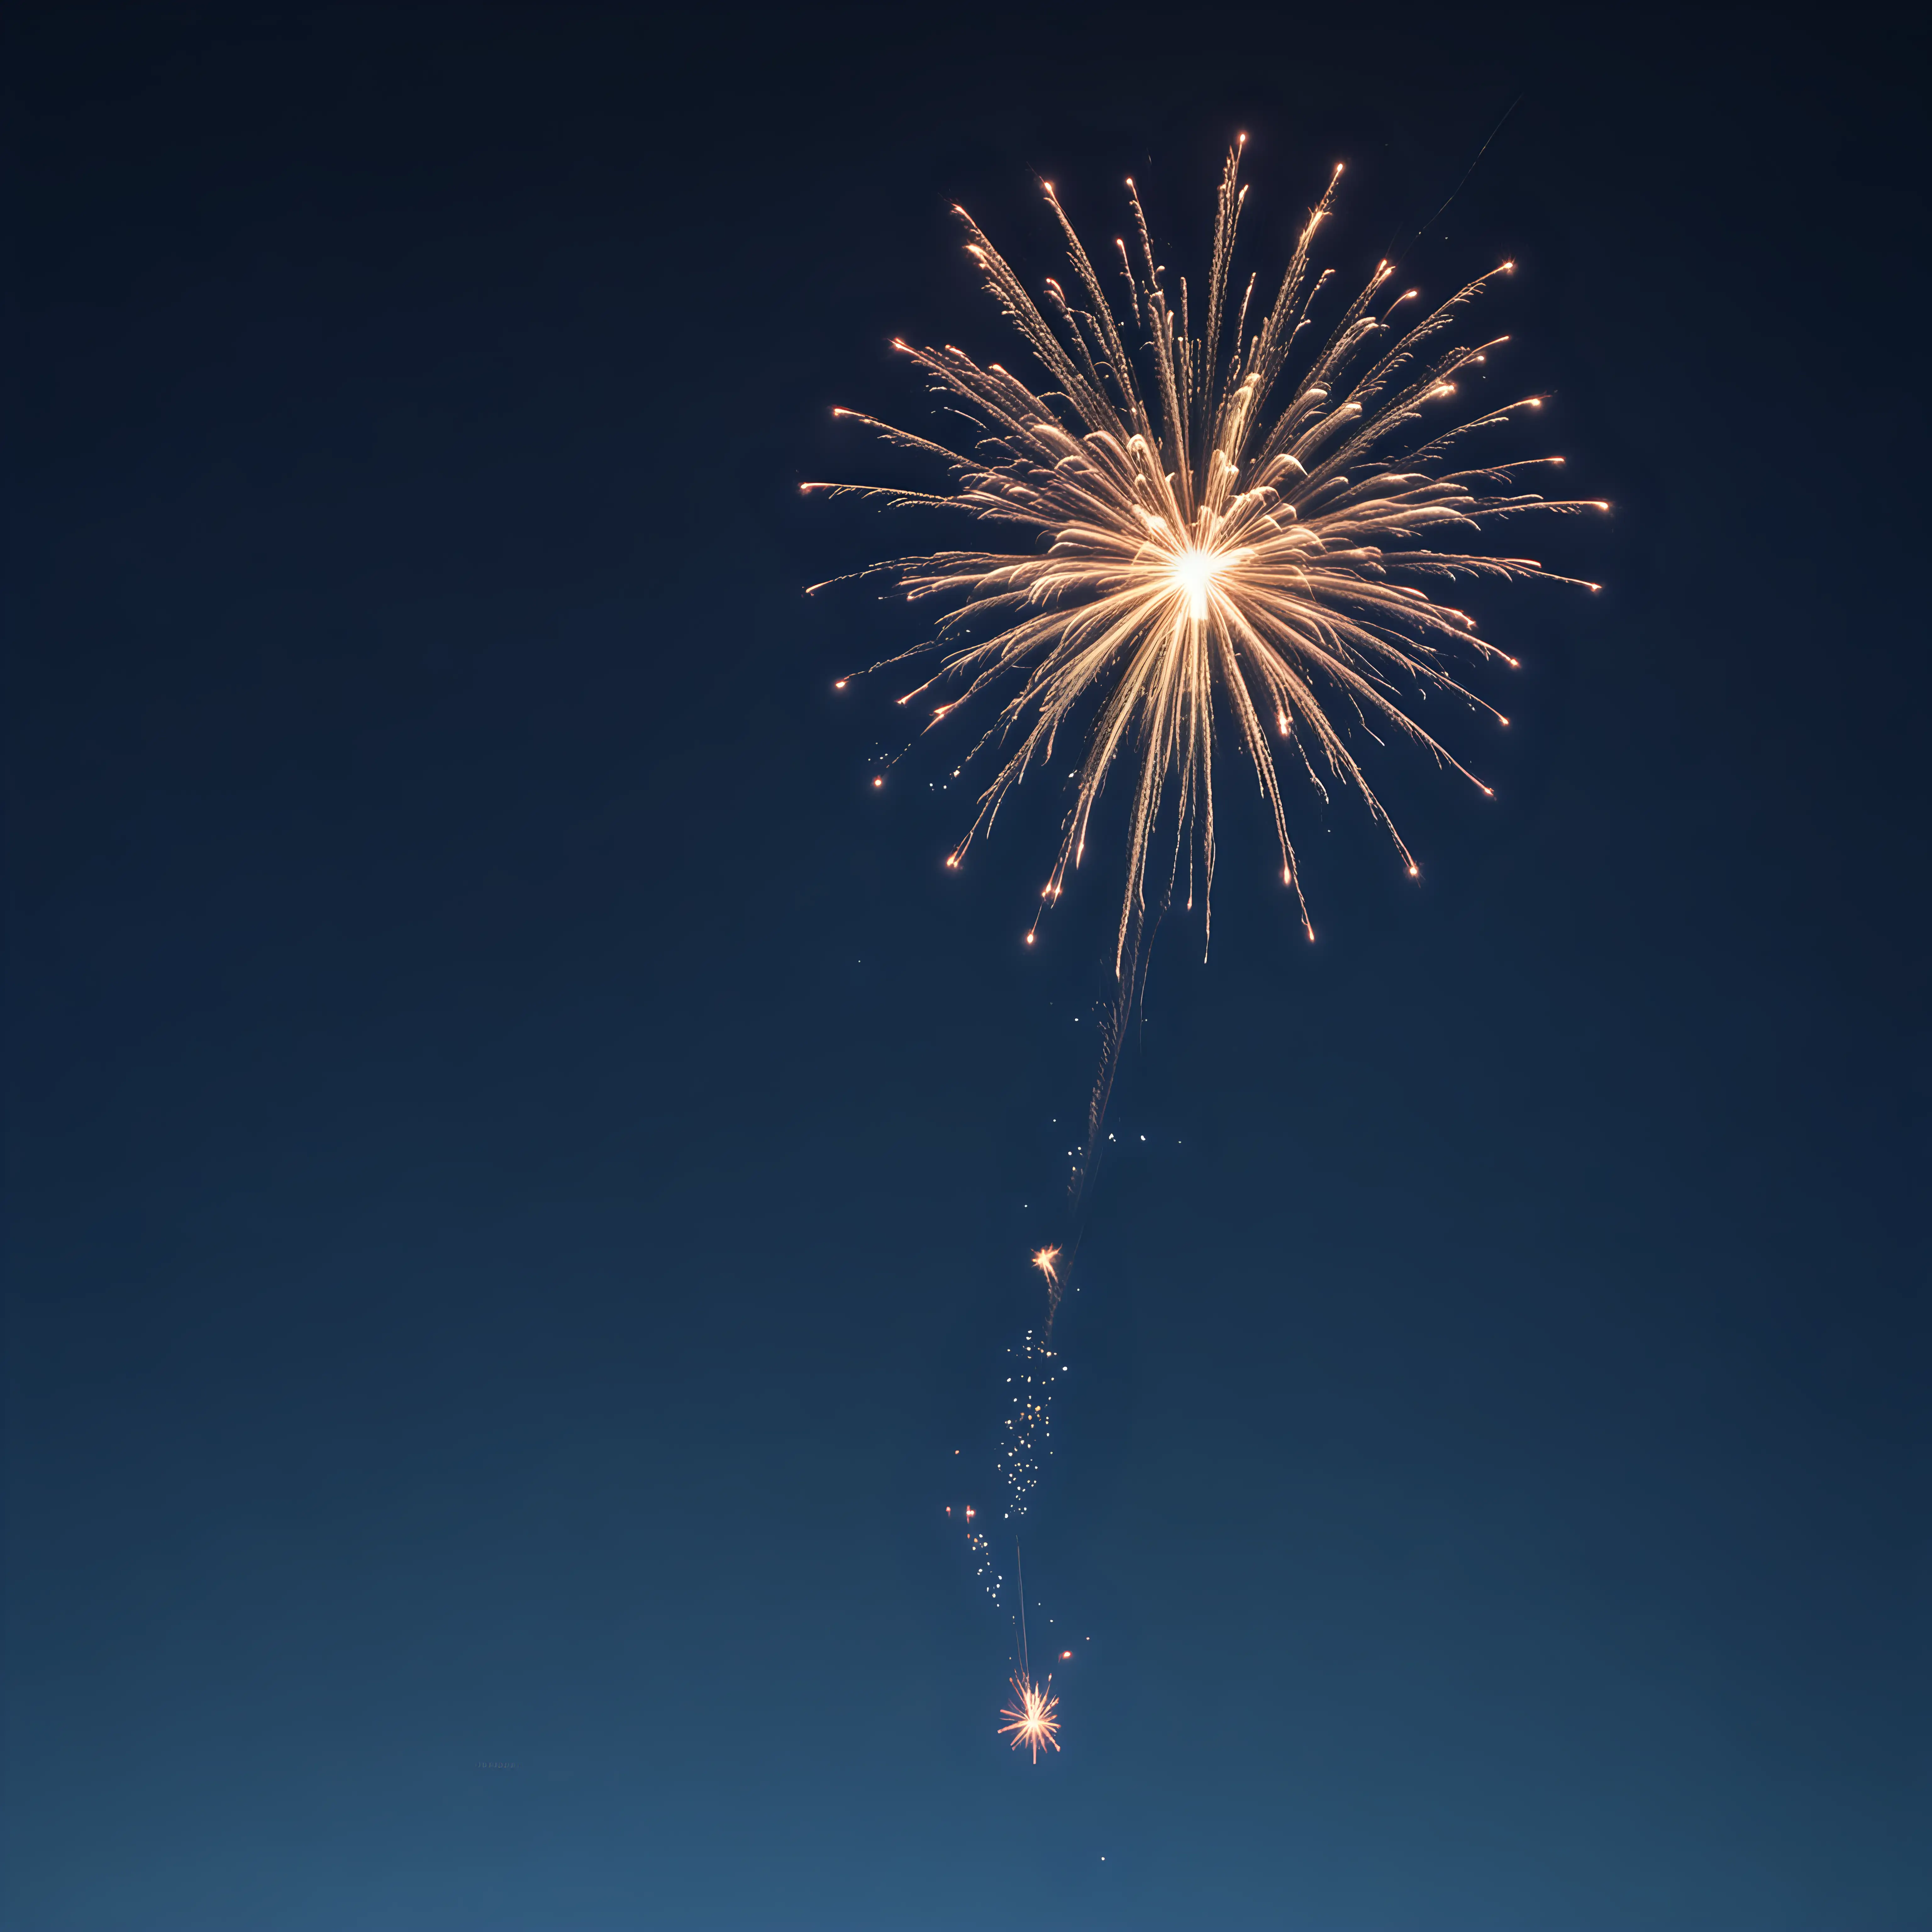 one small glowing firework on a natural darkish bold blue sky background with dimension to it and with no ground